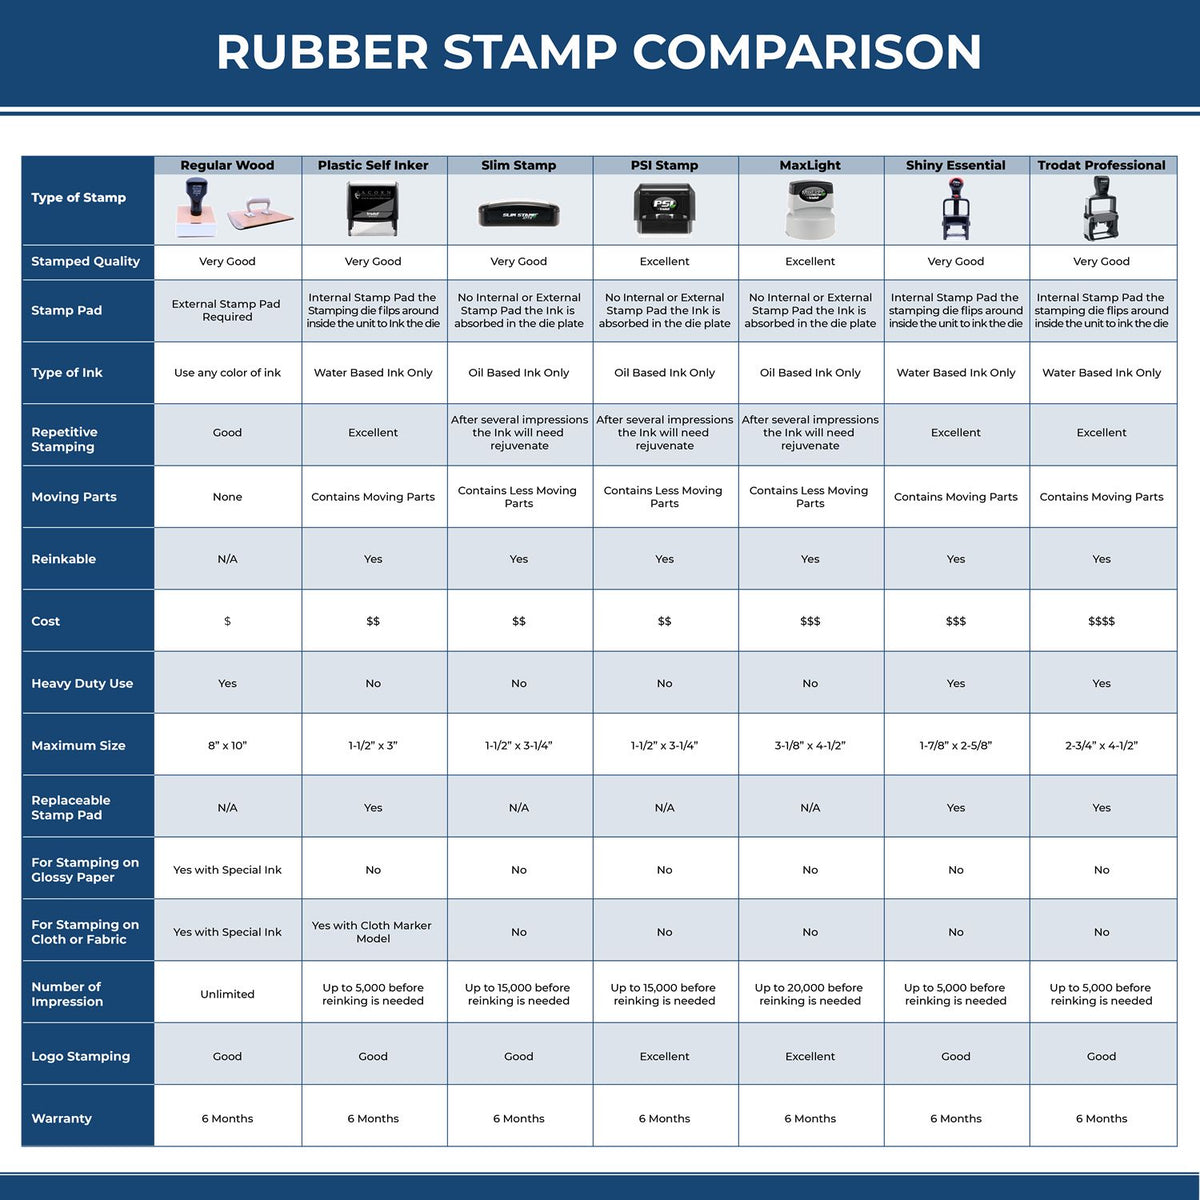 A comparison chart for the different types of mount models available for the Connecticut Professional Engineer Seal Stamp.